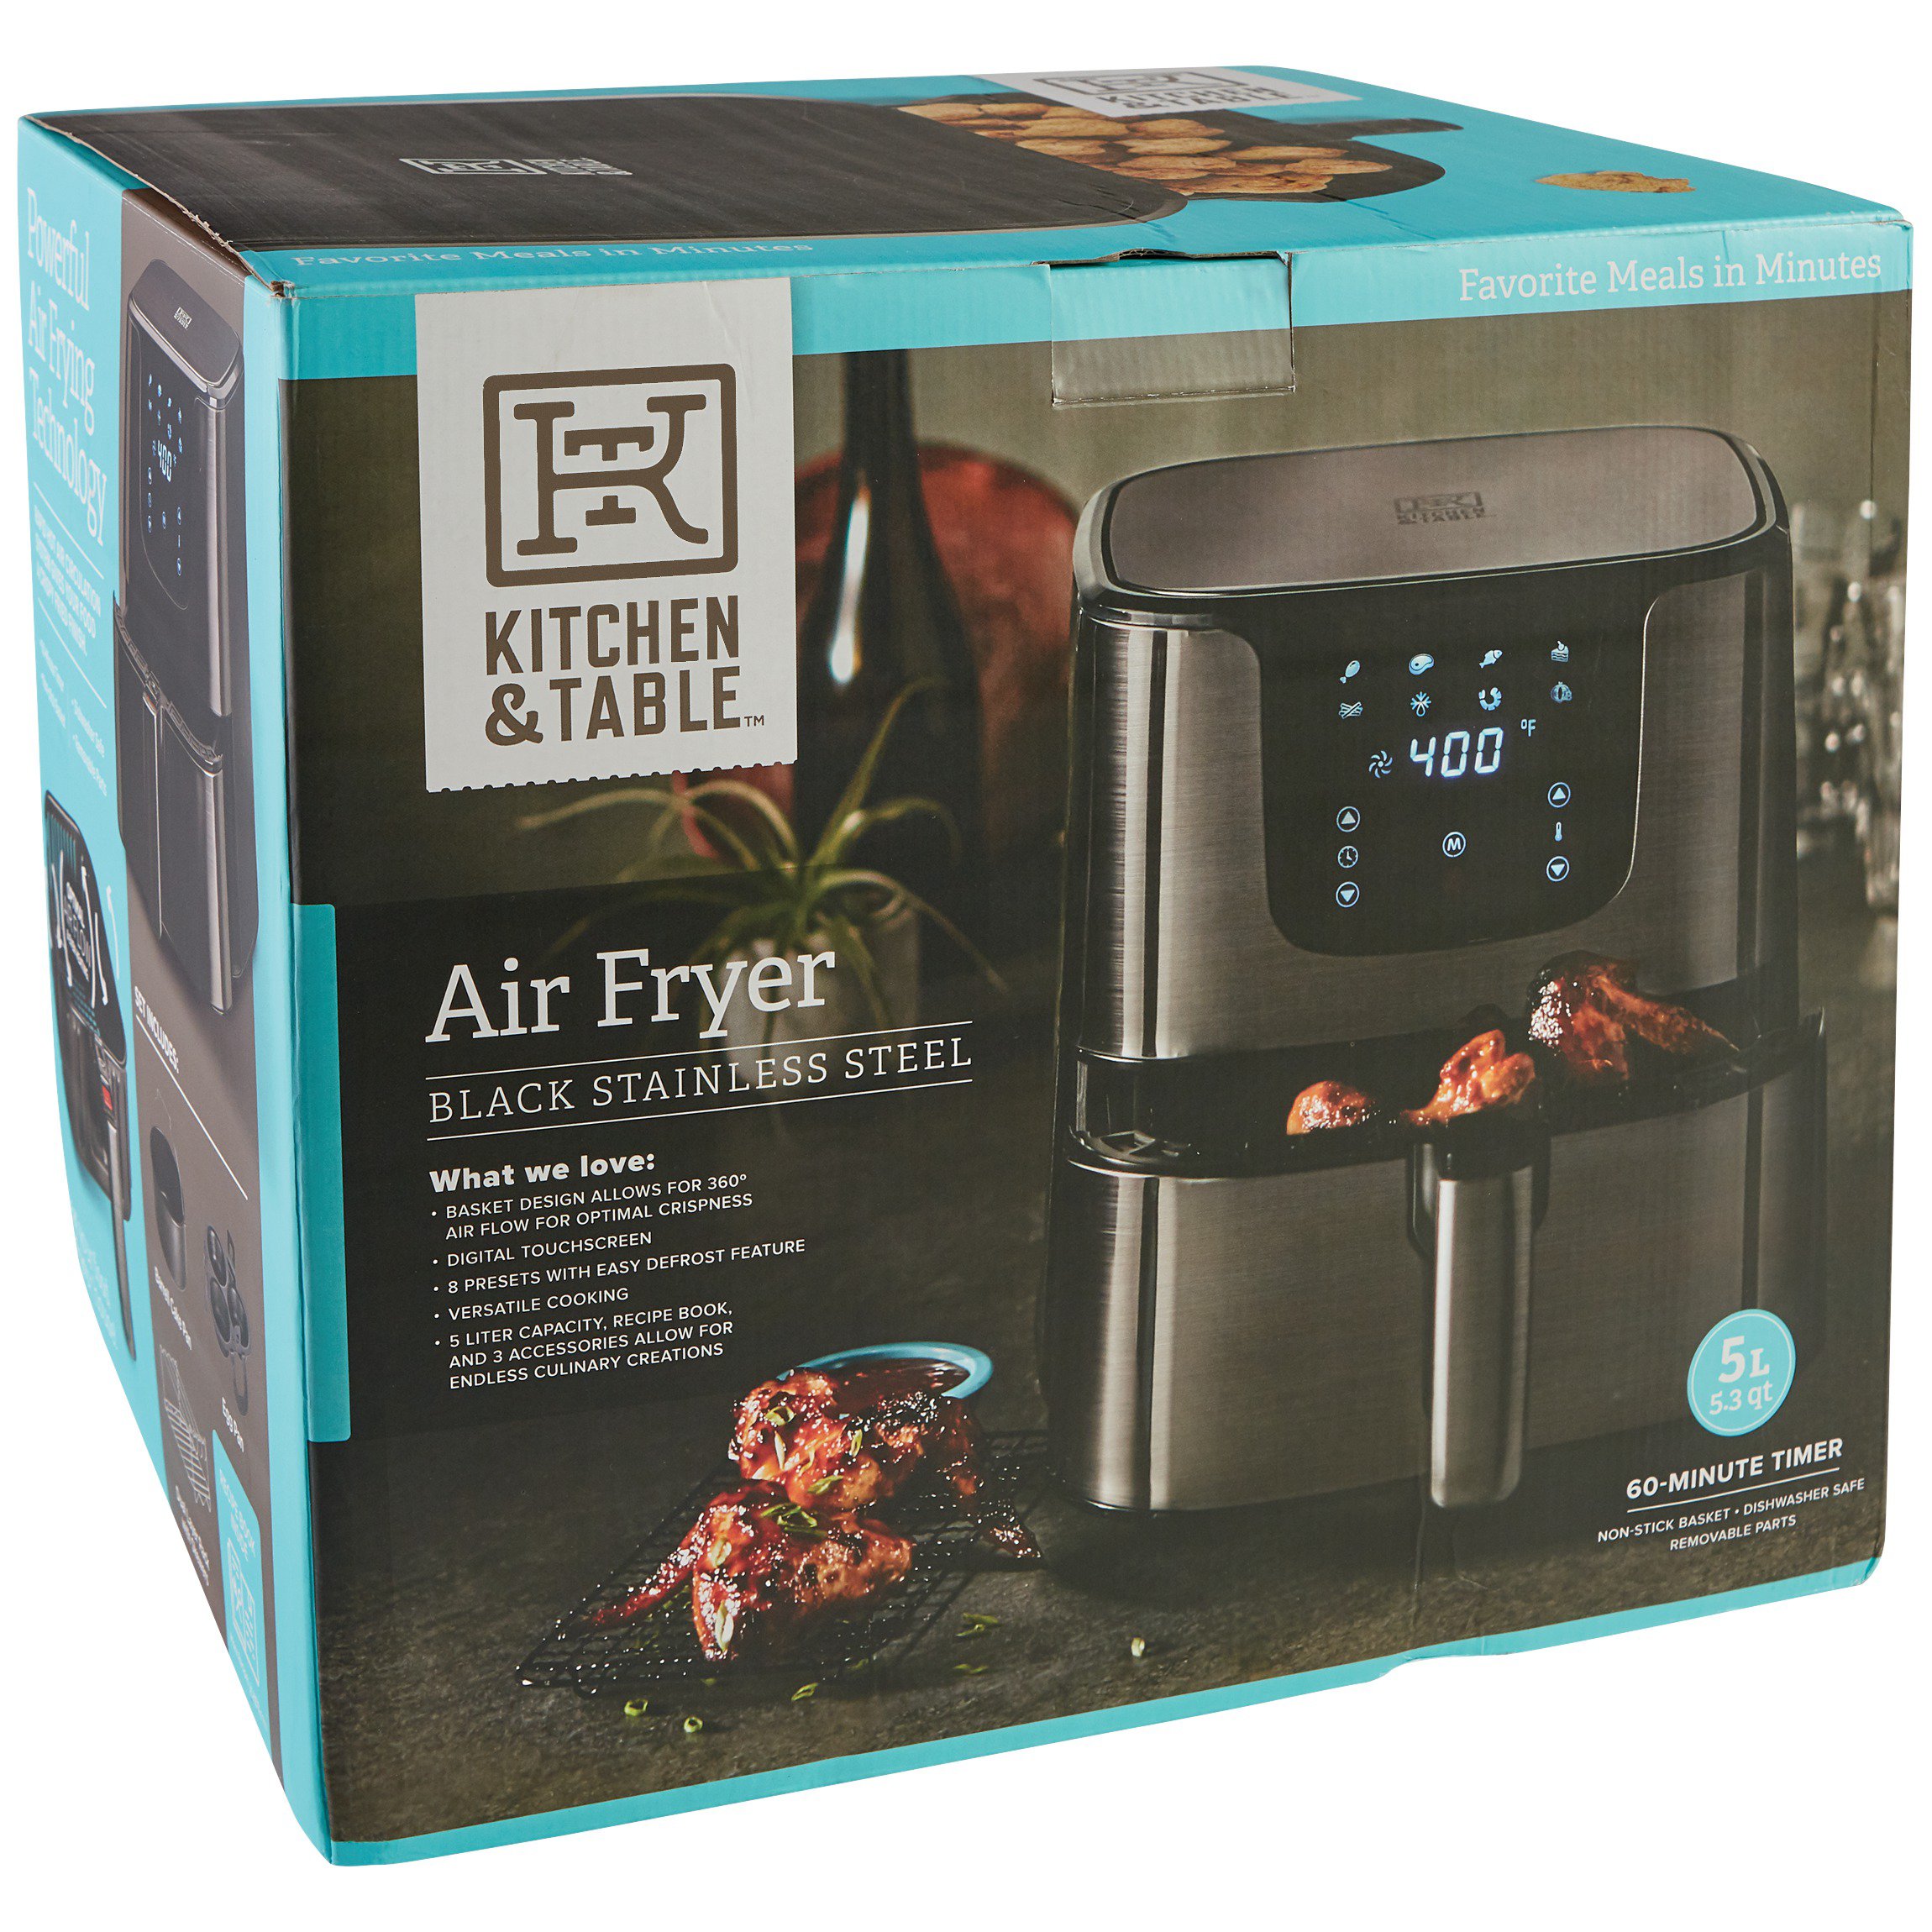 PowerXL Vortex Air Fryer - Slate - Shop Cookers & Roasters at H-E-B